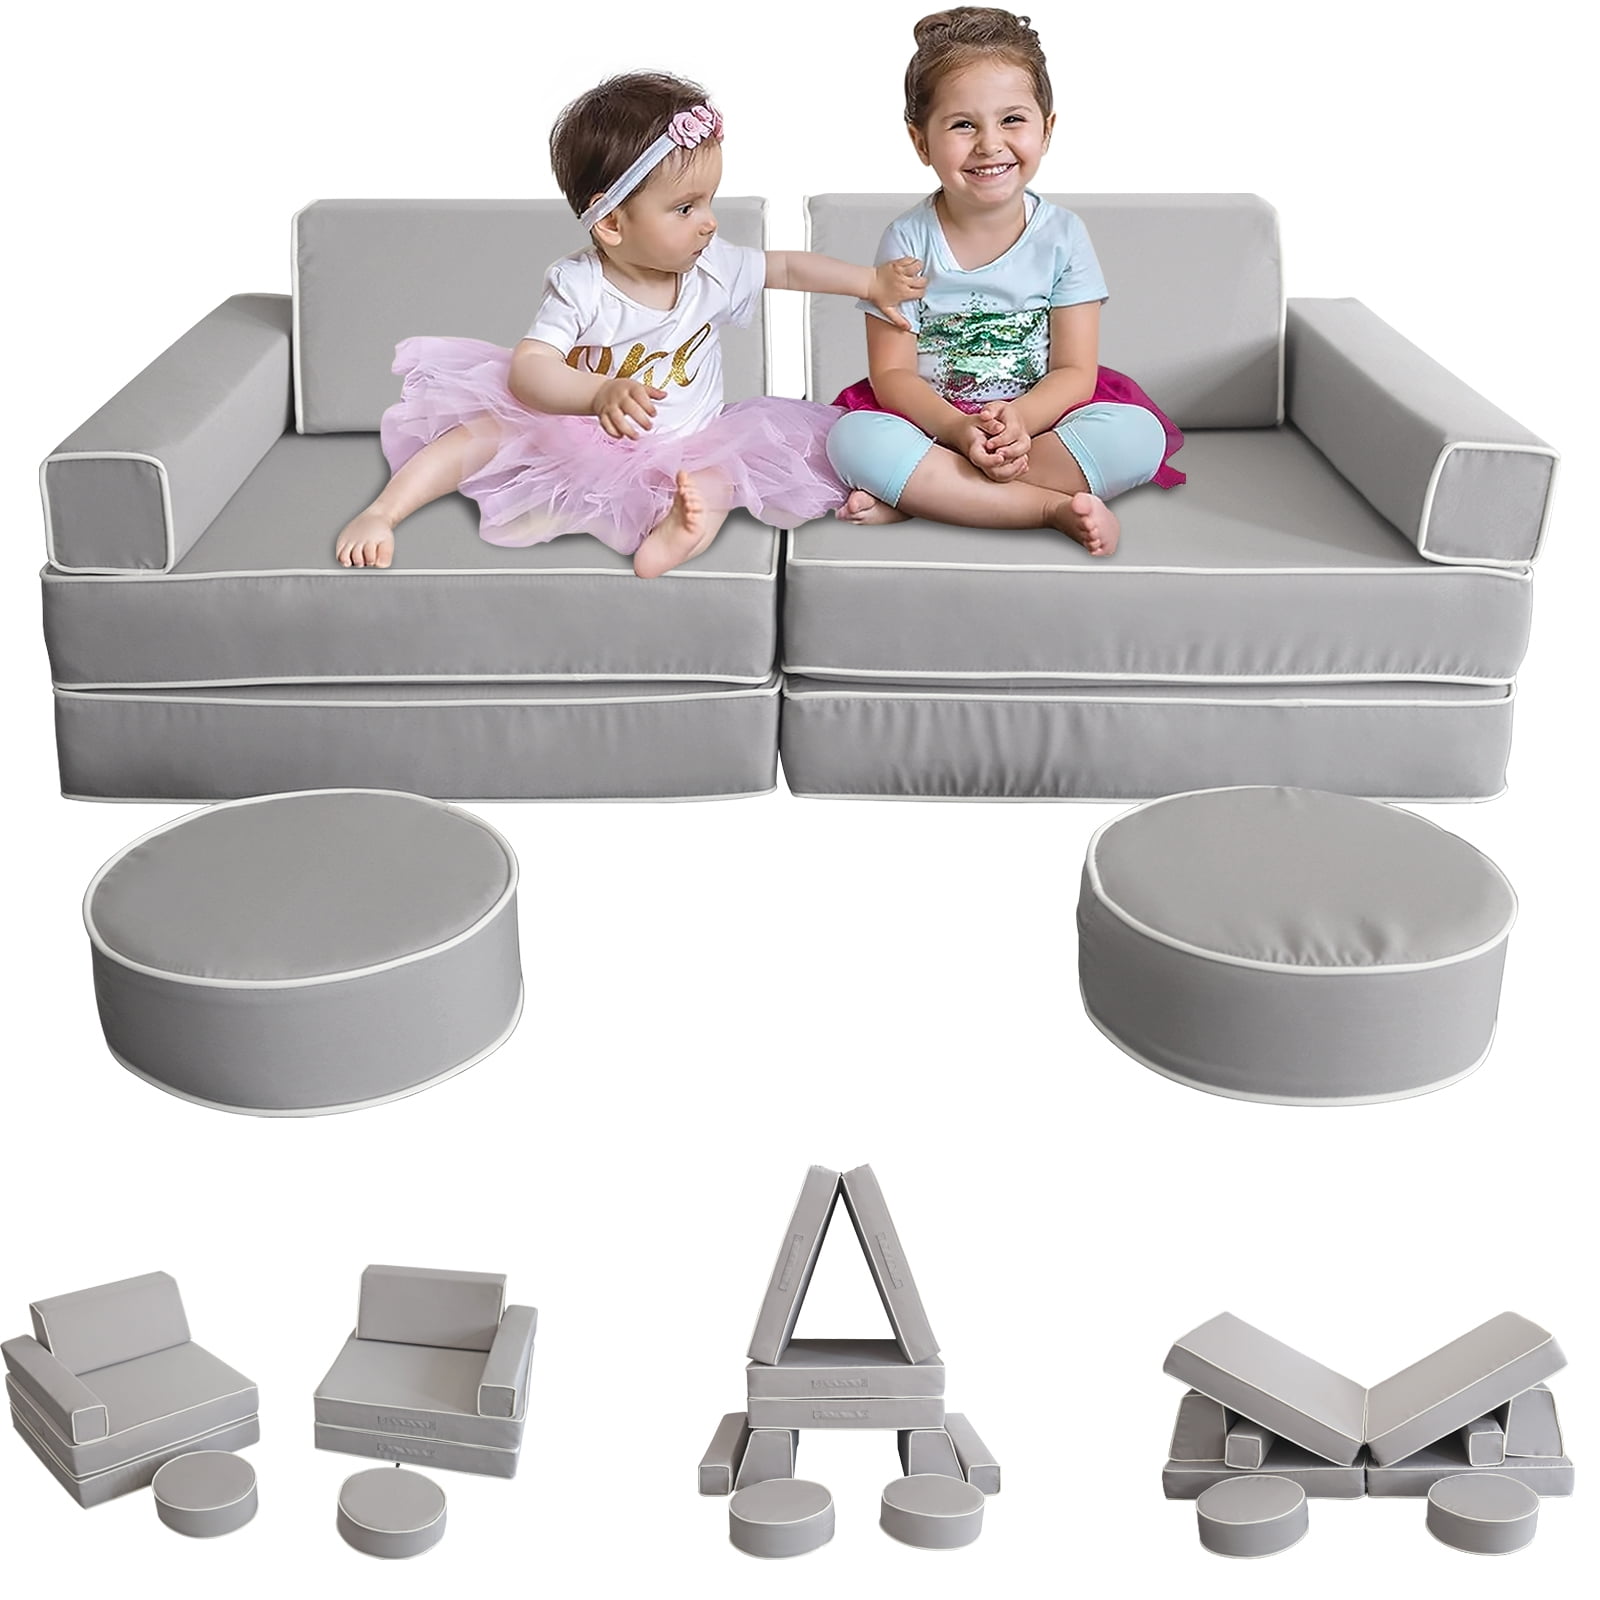 14pcs Kids Couch, Linor Toddler Sofa Modular Kids Couch for Playroom Furniture, Large Size Multifunctional Toddler Couch for Playing, Convertible Foam